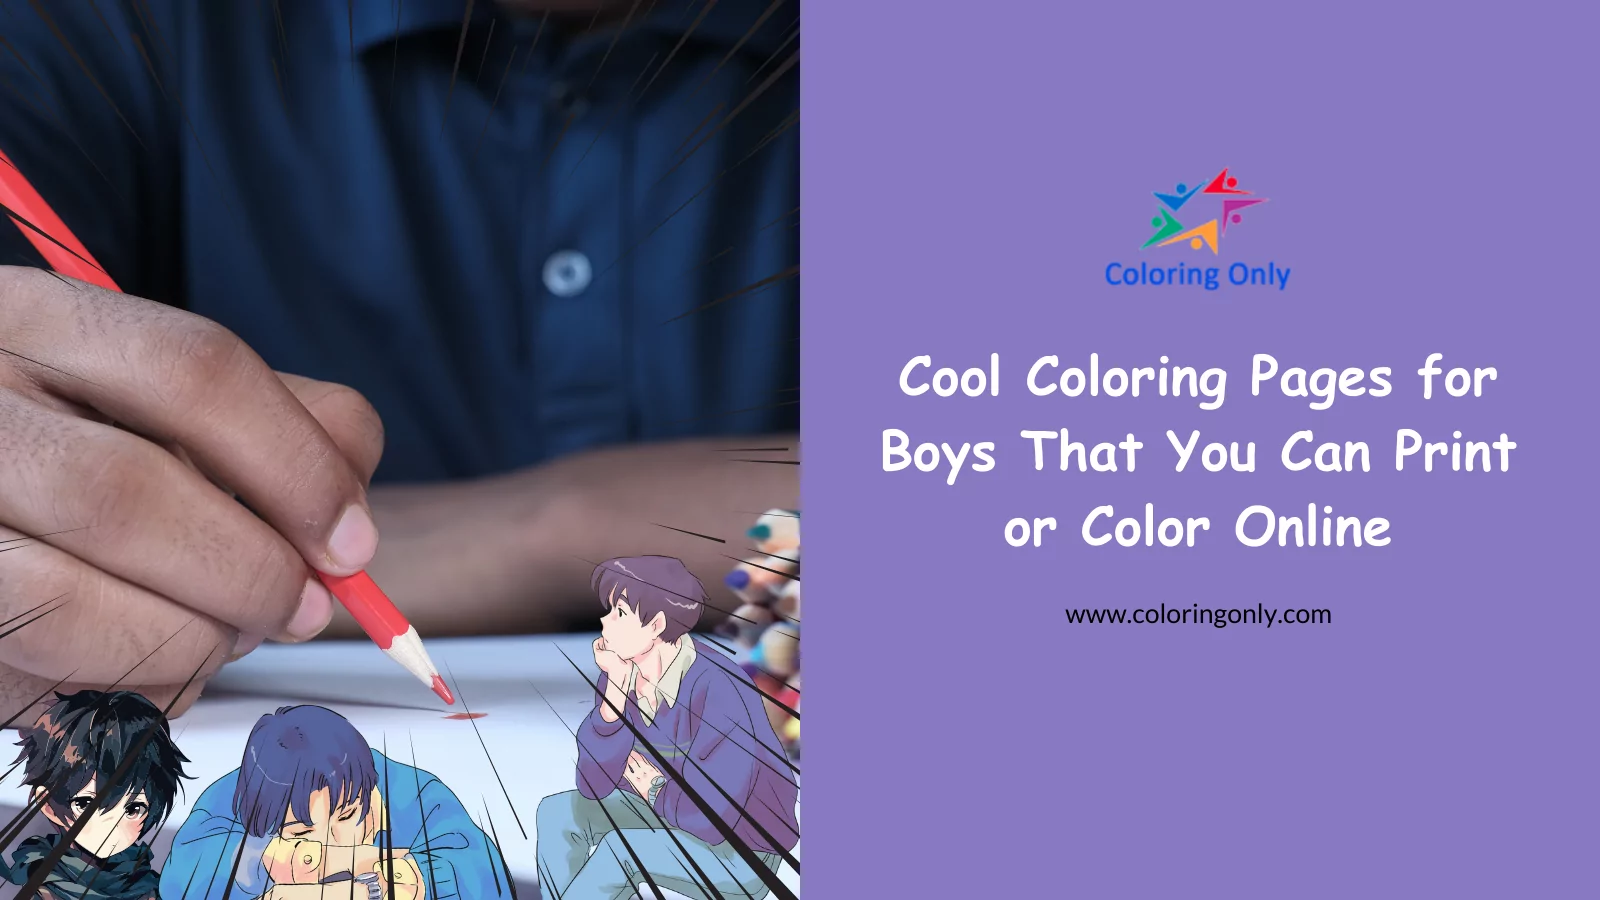 Cool Coloring Pages for Boys That You Can Print or Color Online